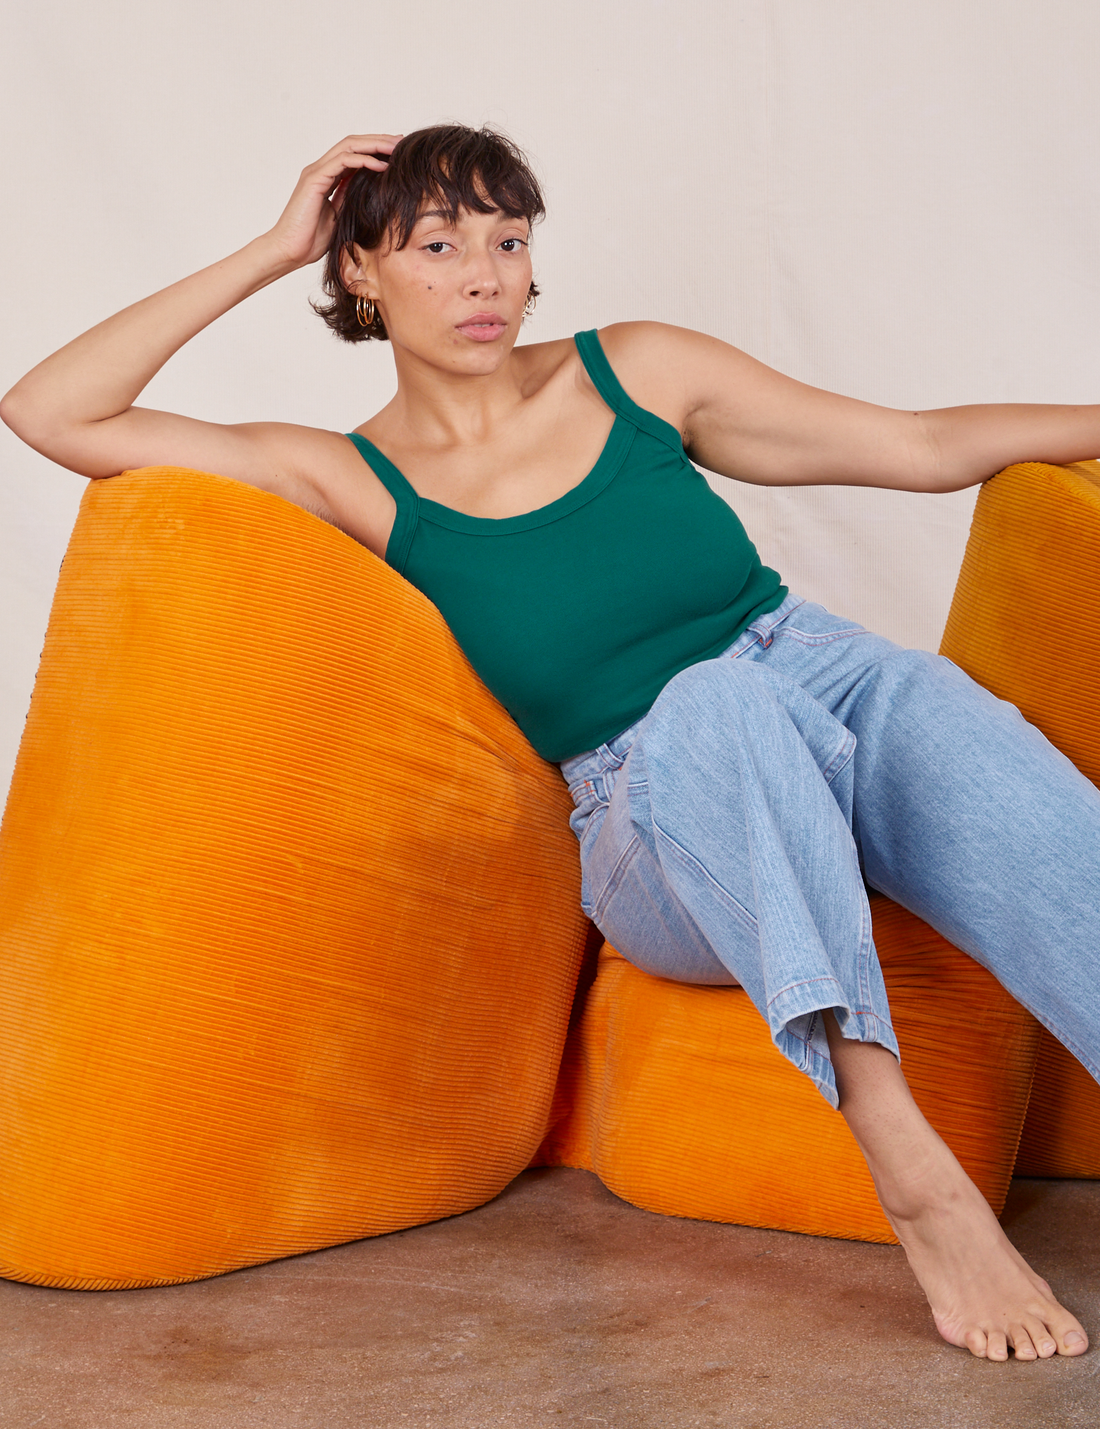 Tiara is sitting on an orange upholstered chair wearing Cropped Cami in Hunter Green and light wash Frontier Jeans